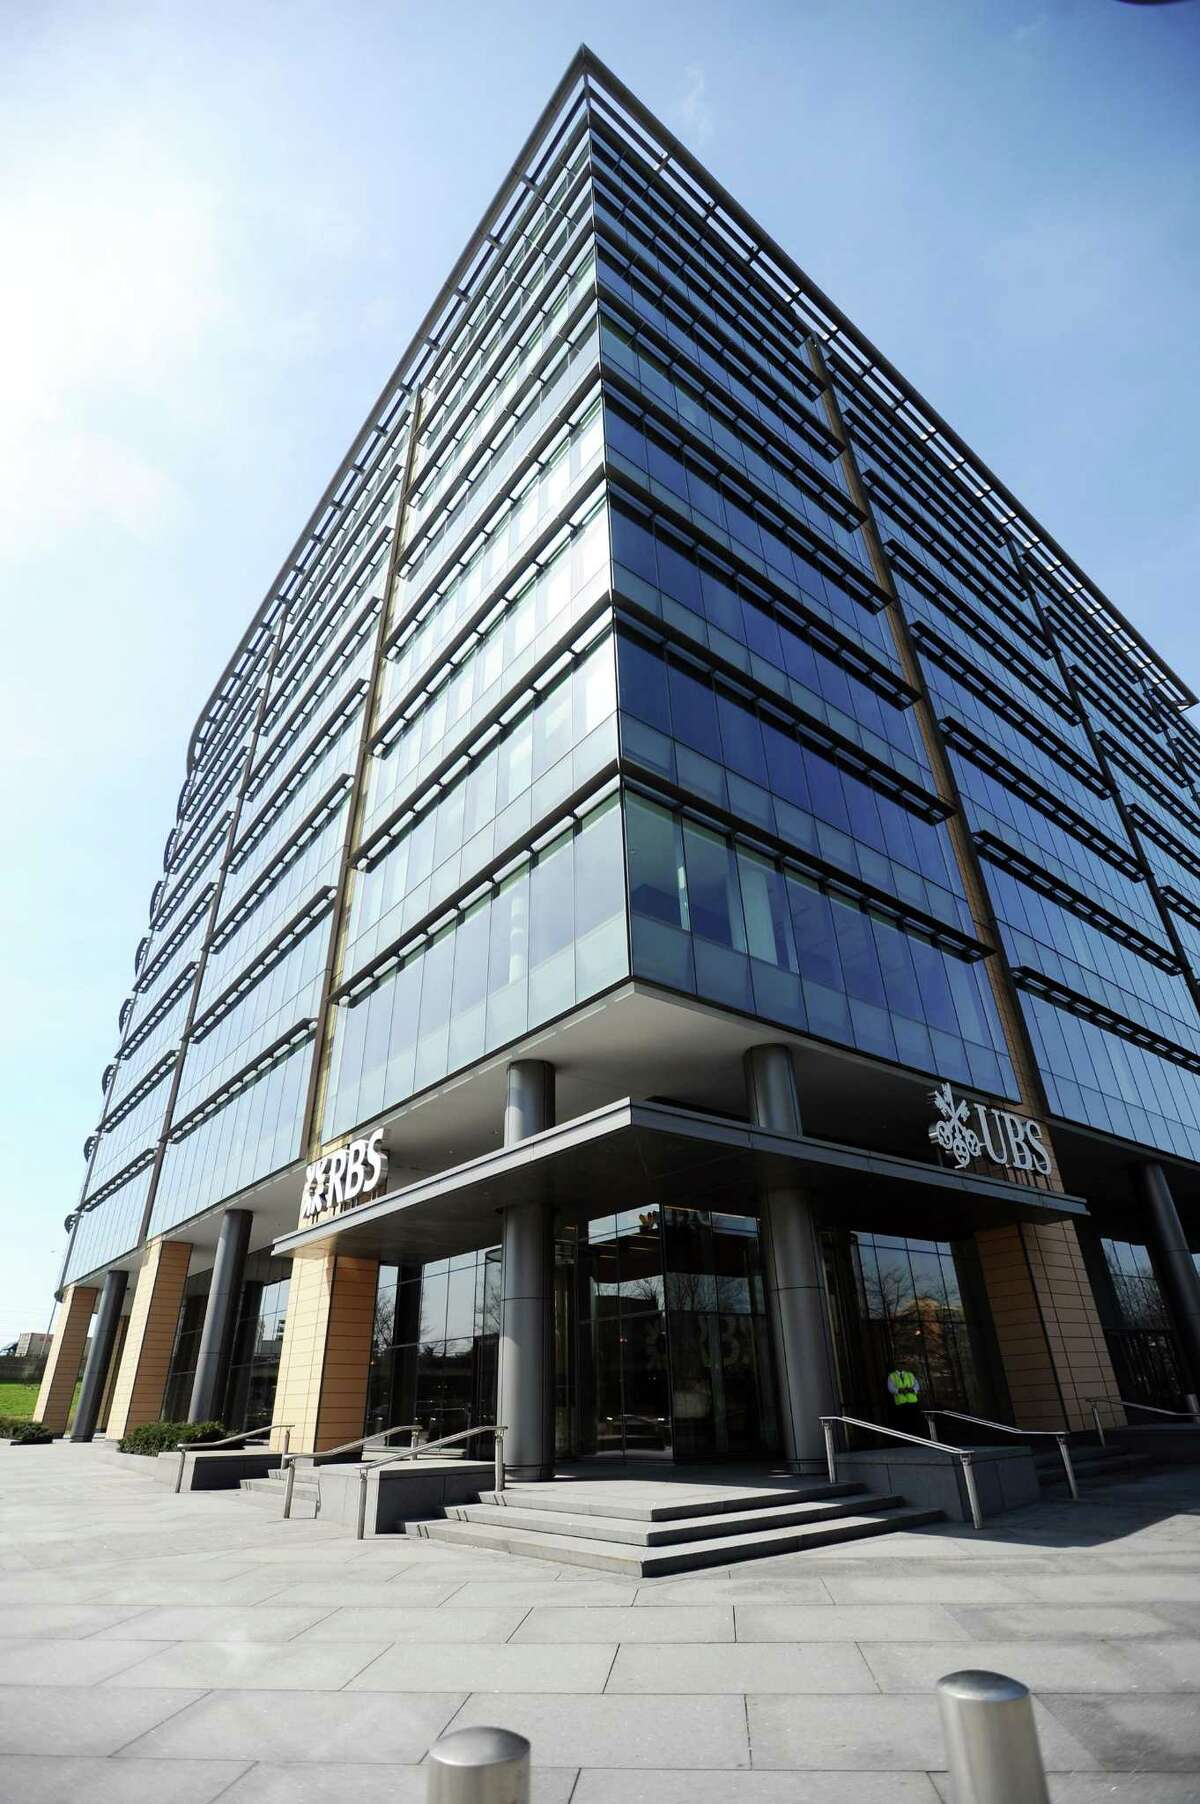 Royal Bank of Scotland’s Americas headquarters, as well as offices for UBS, are located at 677 Washington Blvd., in downtown Stamford, Conn.